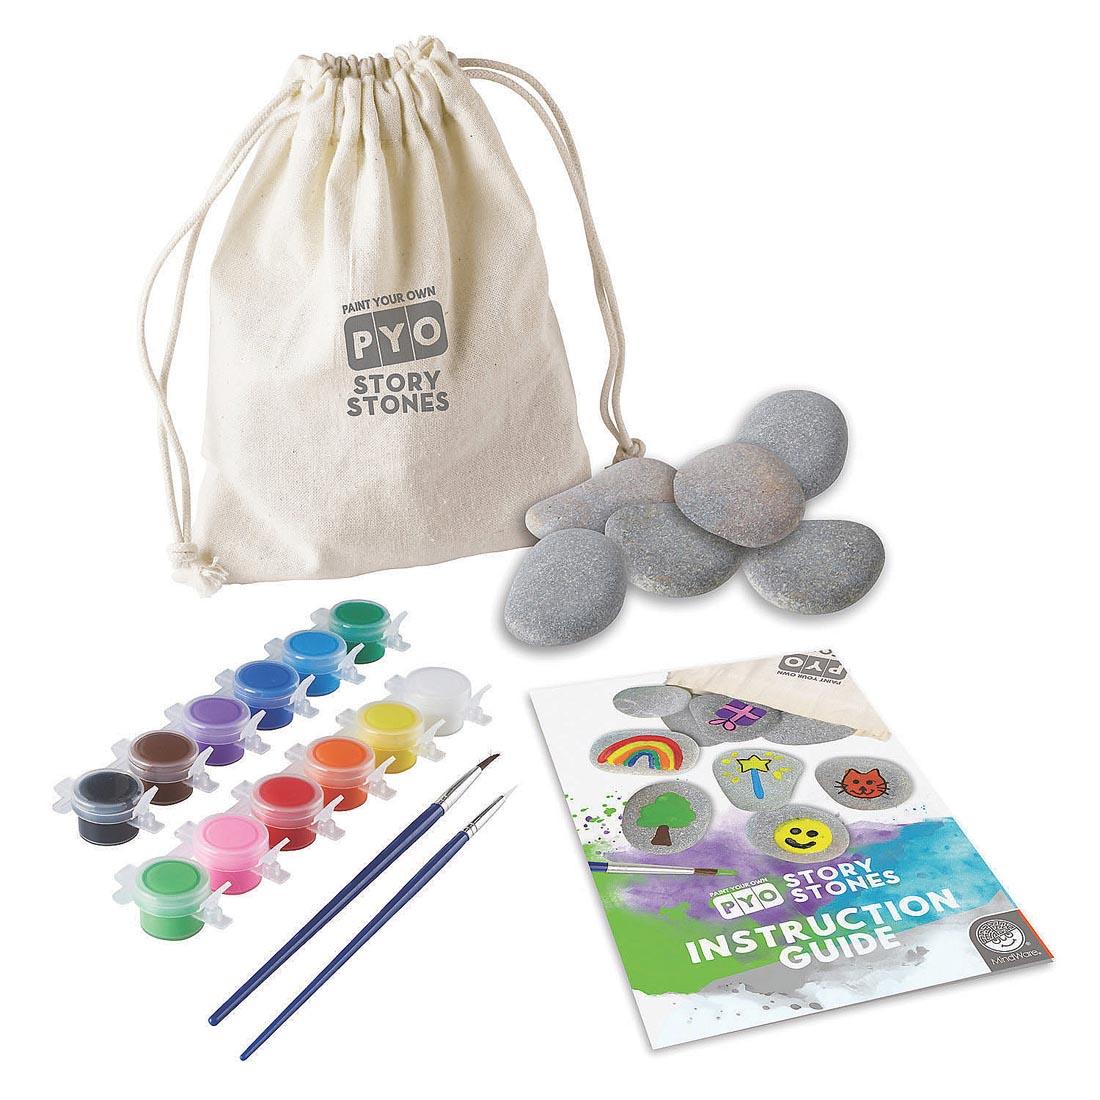 Components of the Paint Your Own Story Stones Kit